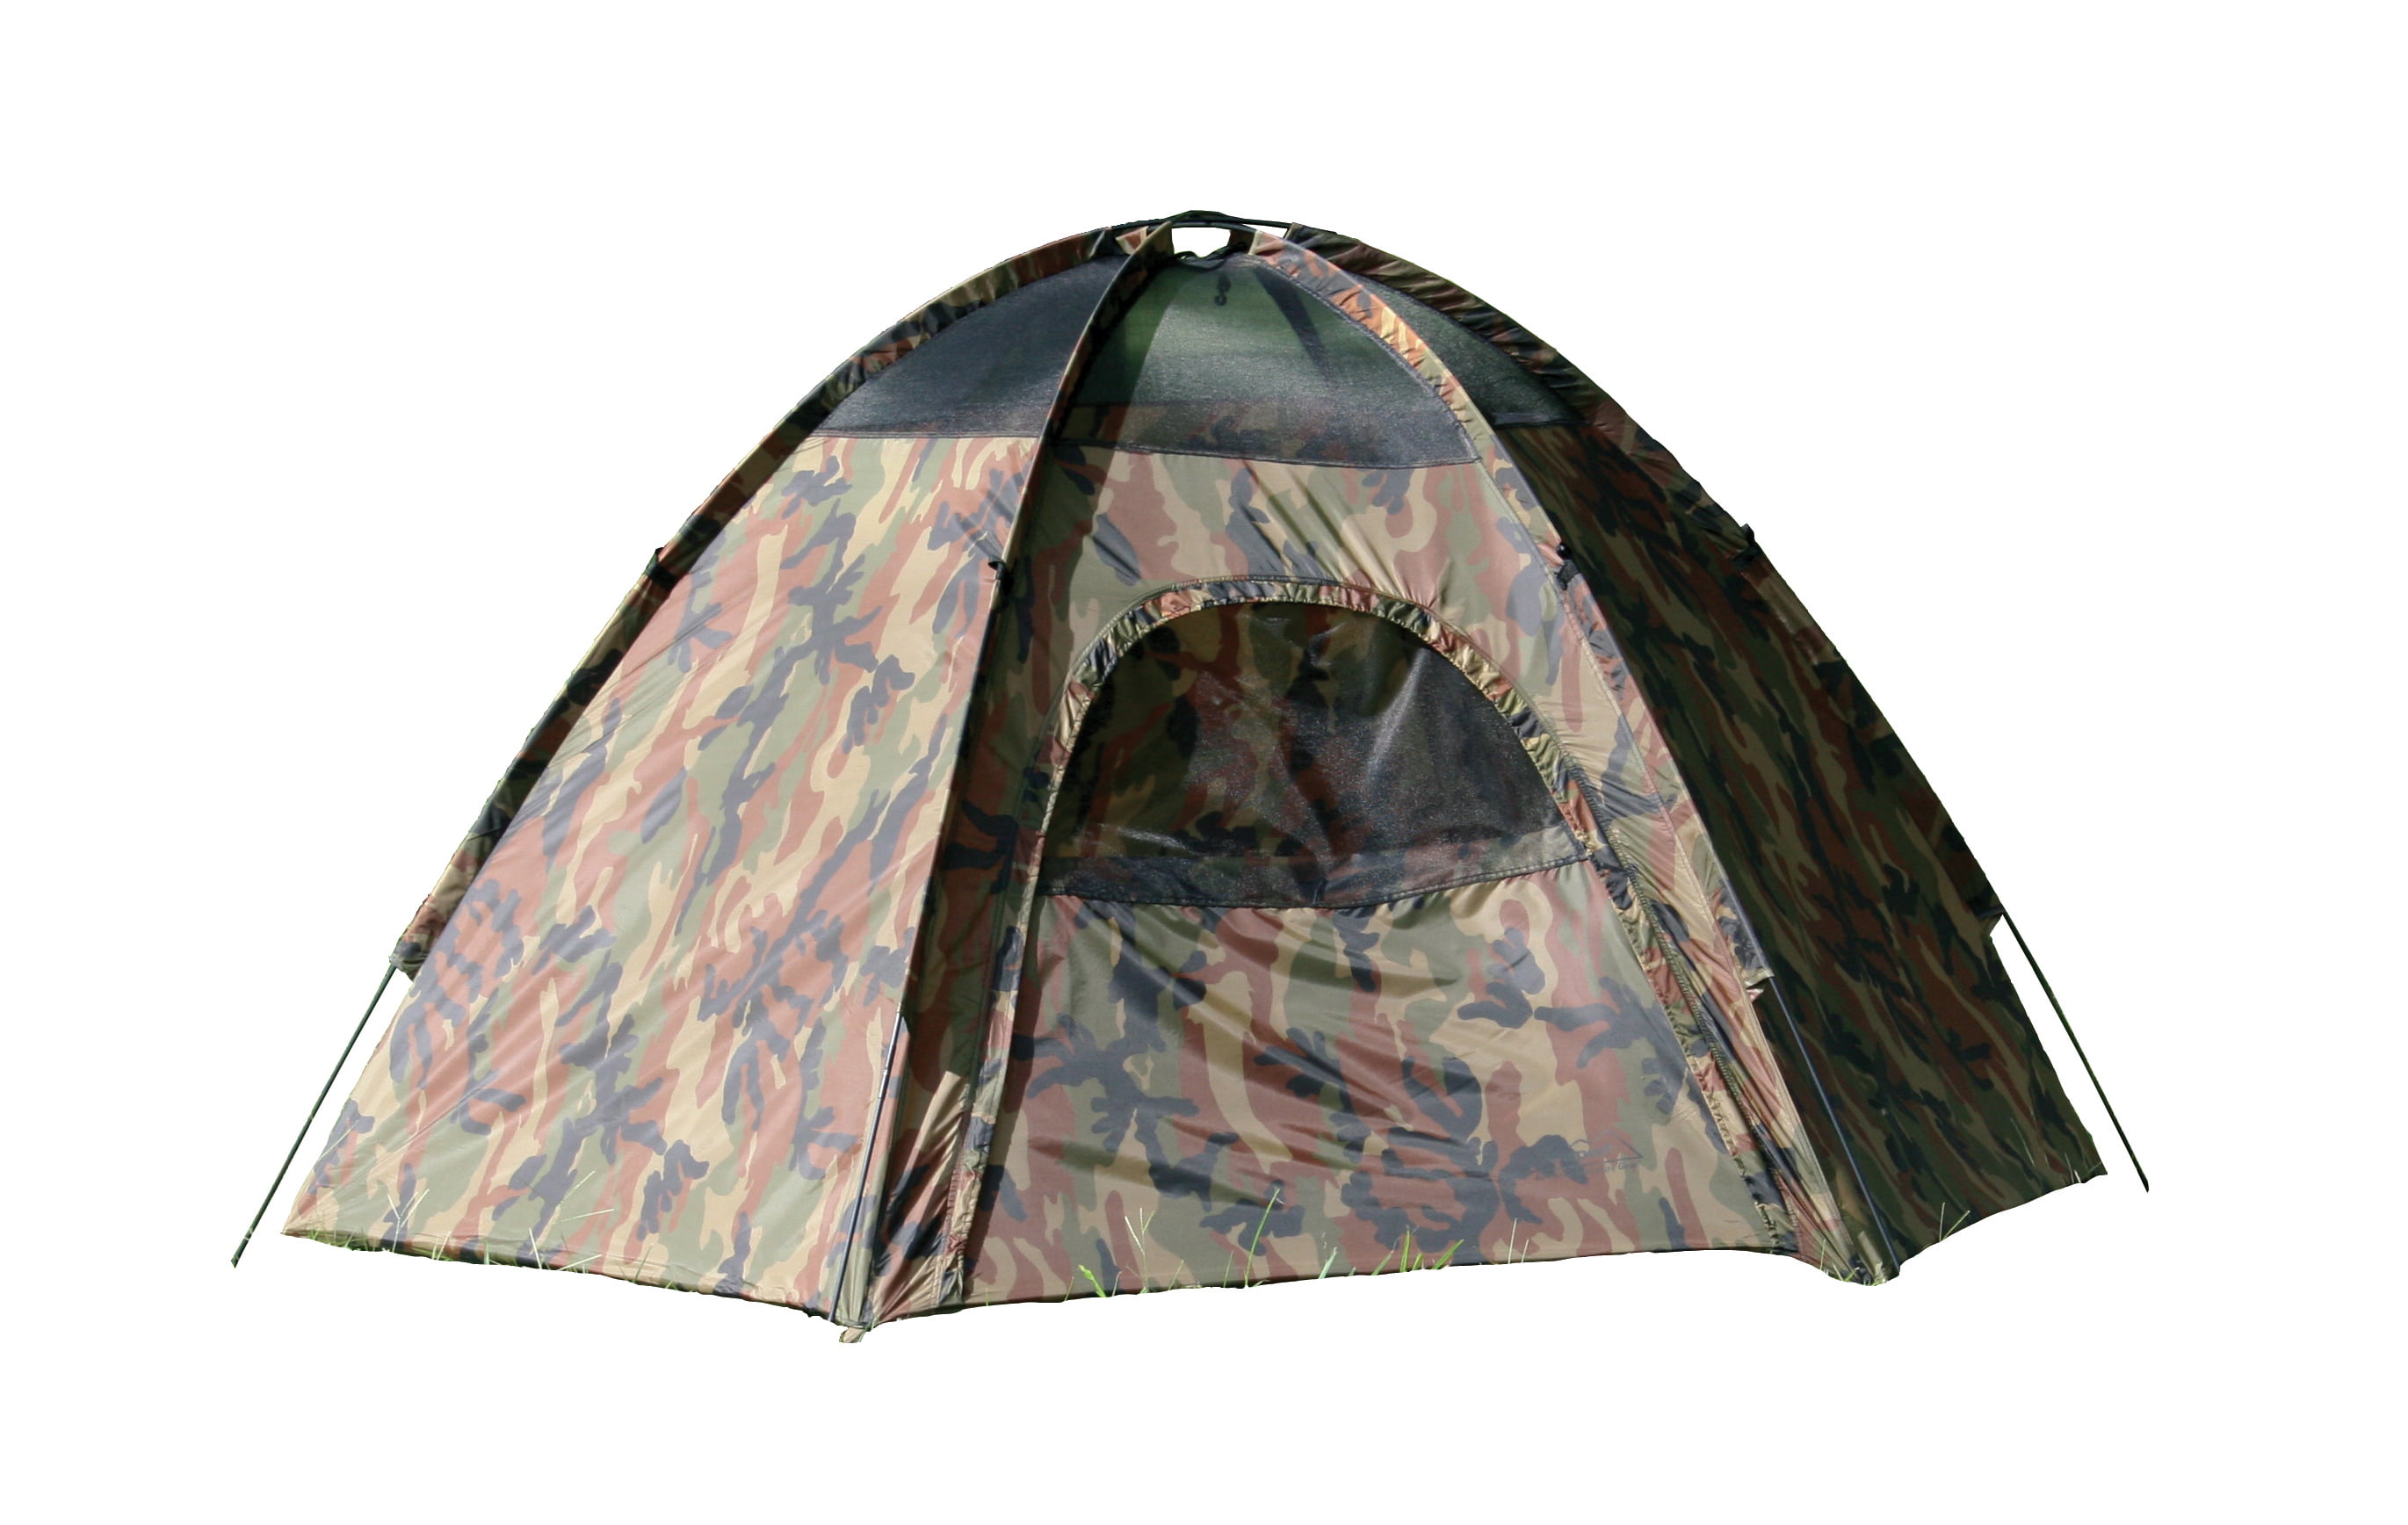 Texsport Expedition Tent